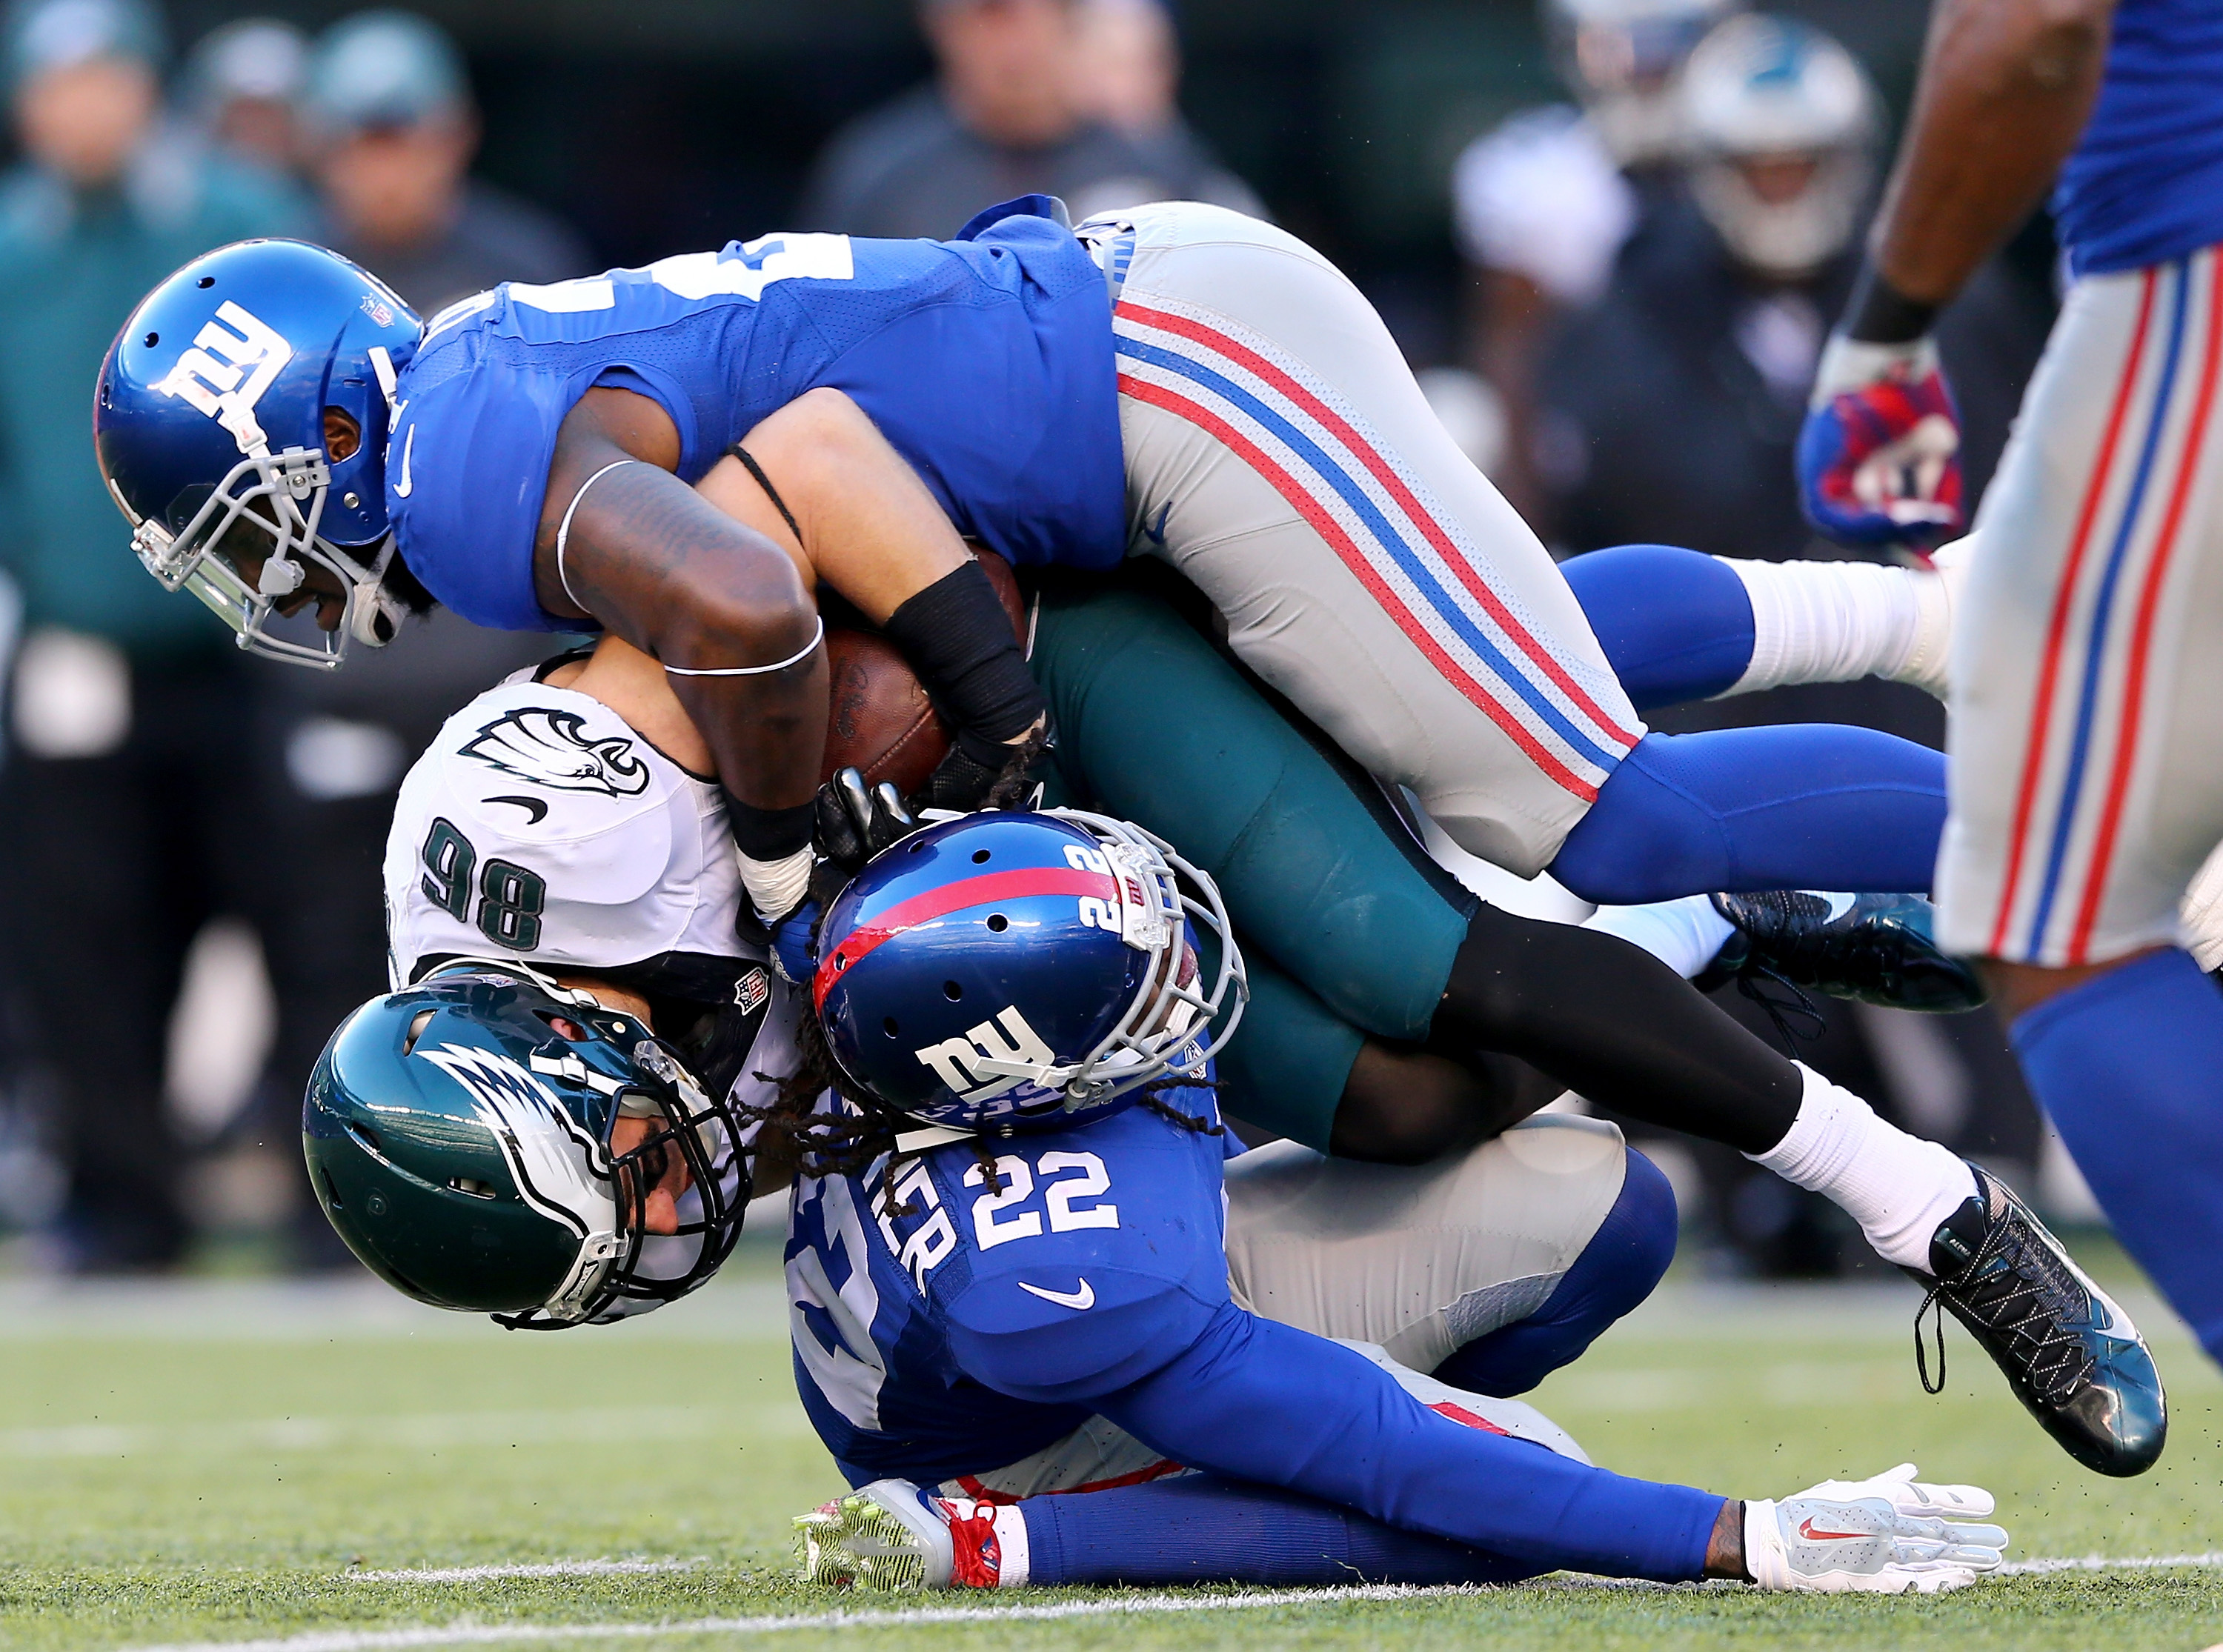 Landon Collins and Brandon Meriweather, bottom of the New York Giants tackle Zach Ertz of the Philadelphia Eagles at MetLife Stadium on Jan. 3, 2016. (Photo by Elsa/Getty Images)